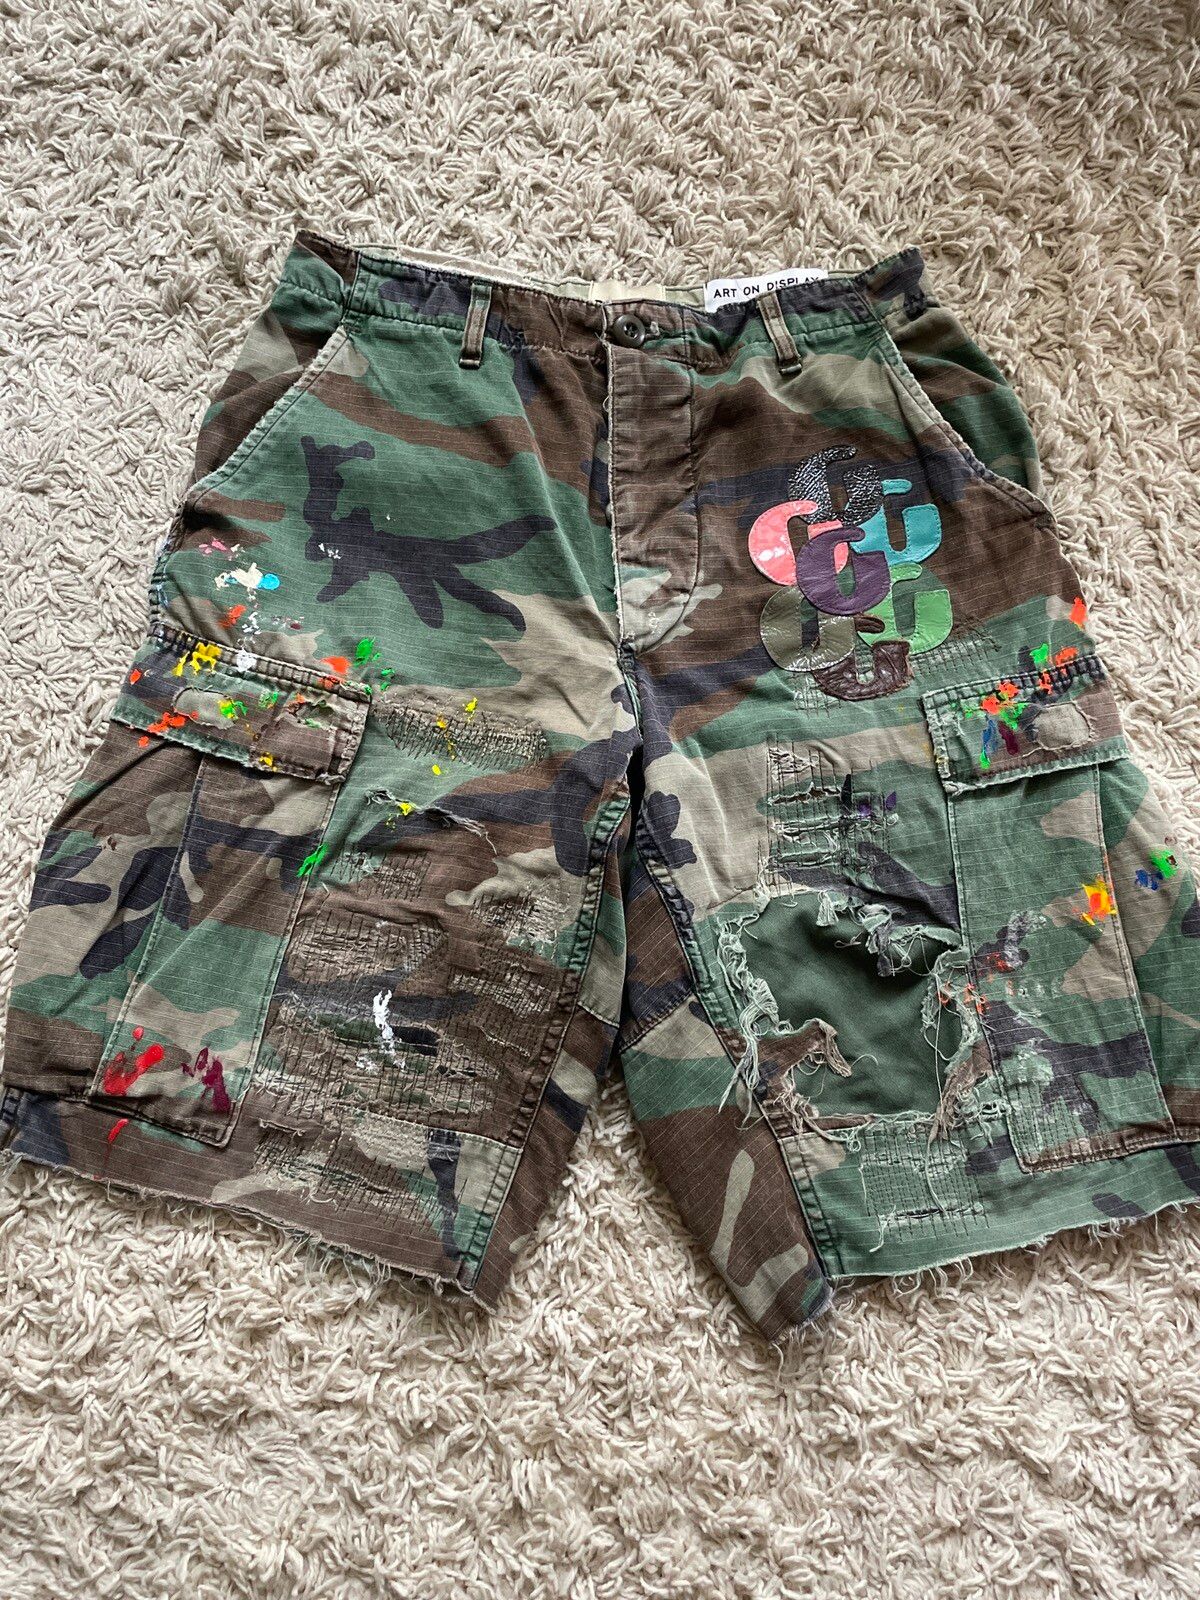 Gallery Dept. Gallery dept G patch camo cargo shorts Size US 29 - 1 Preview